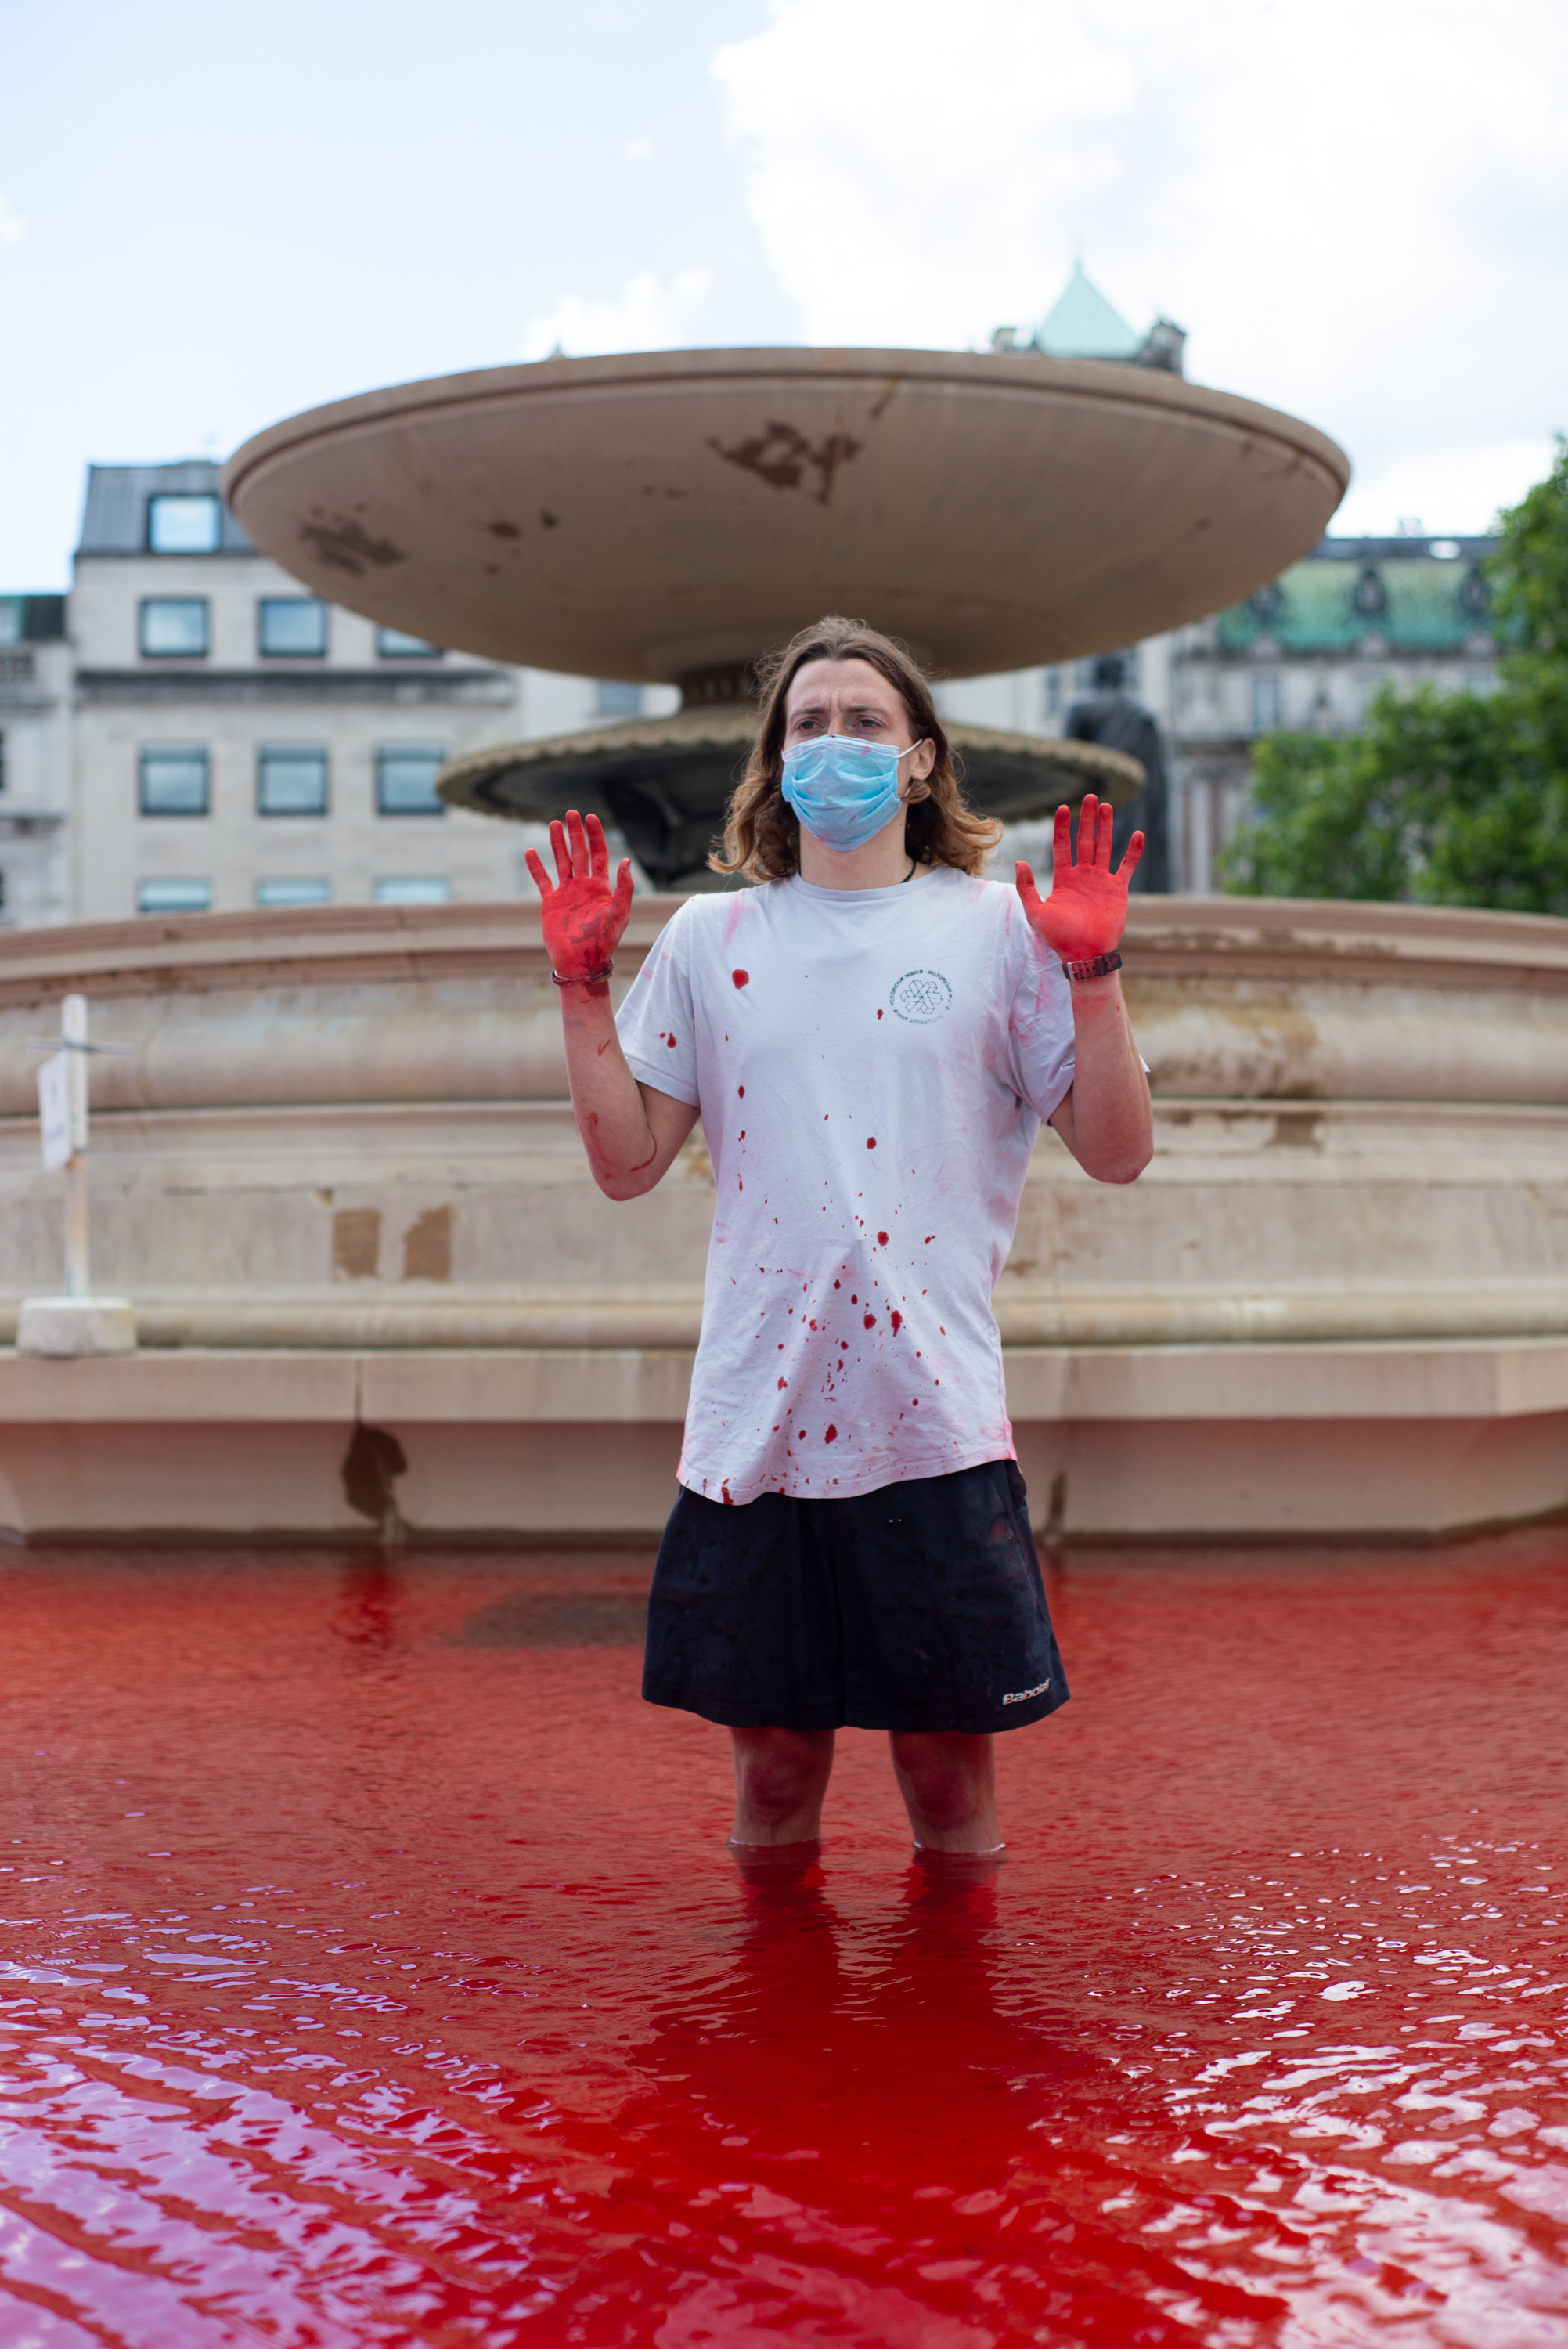 A protester with blood red hands